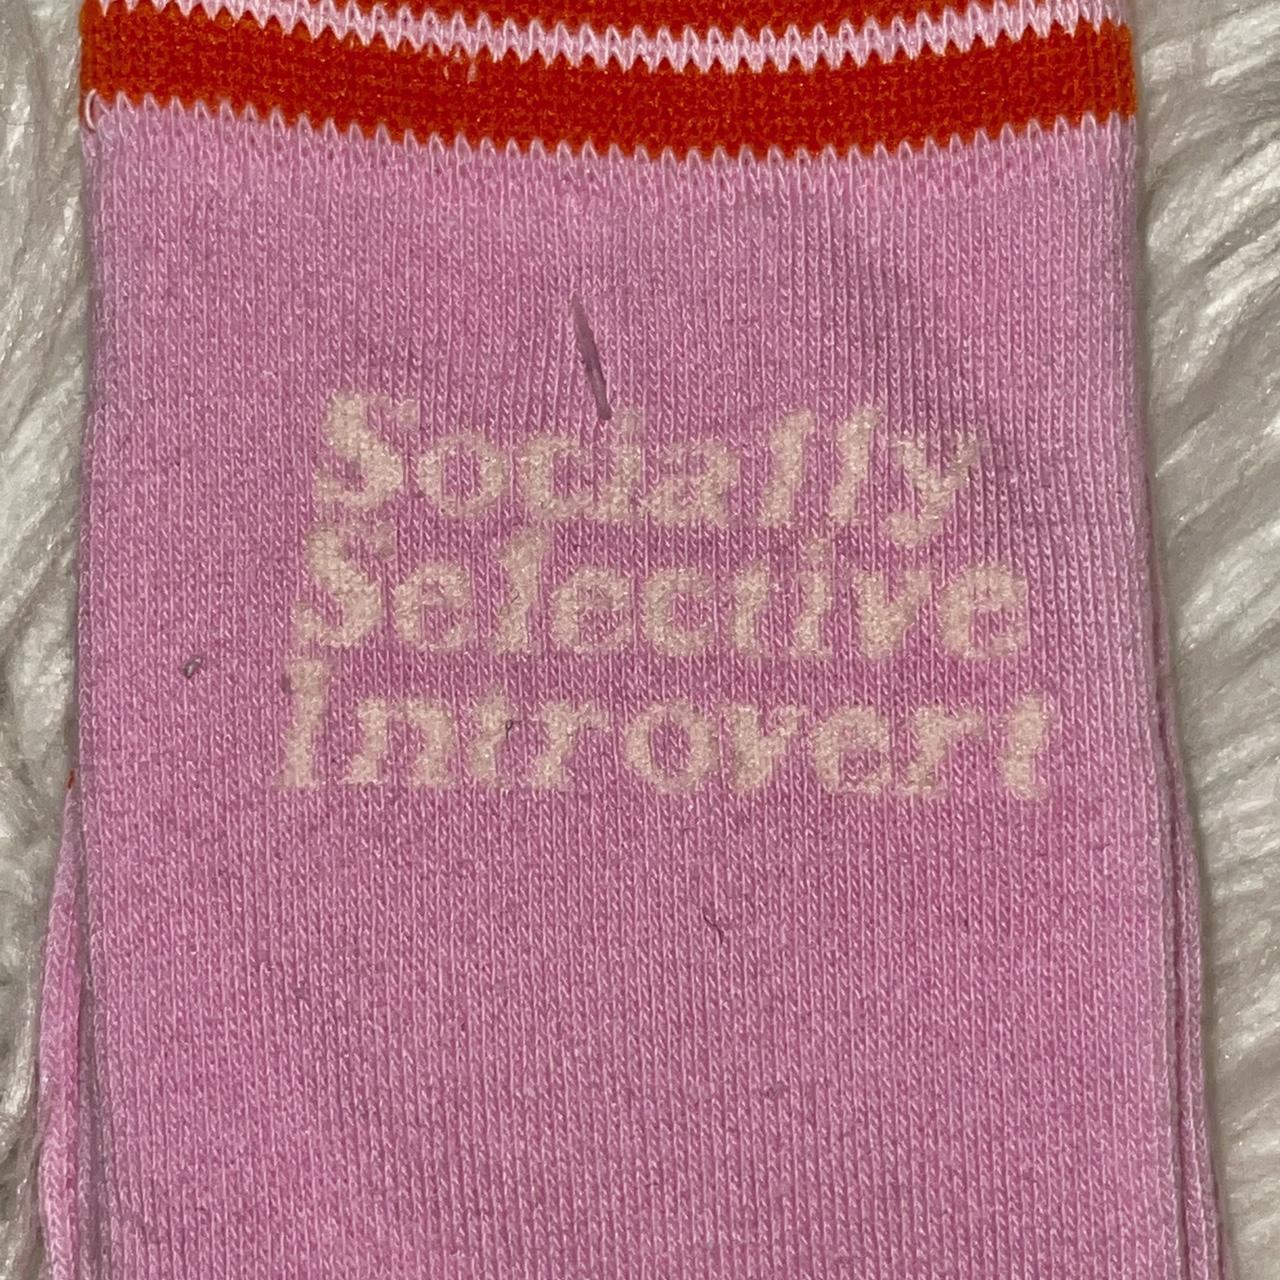 Typo Women's Red and Pink Socks